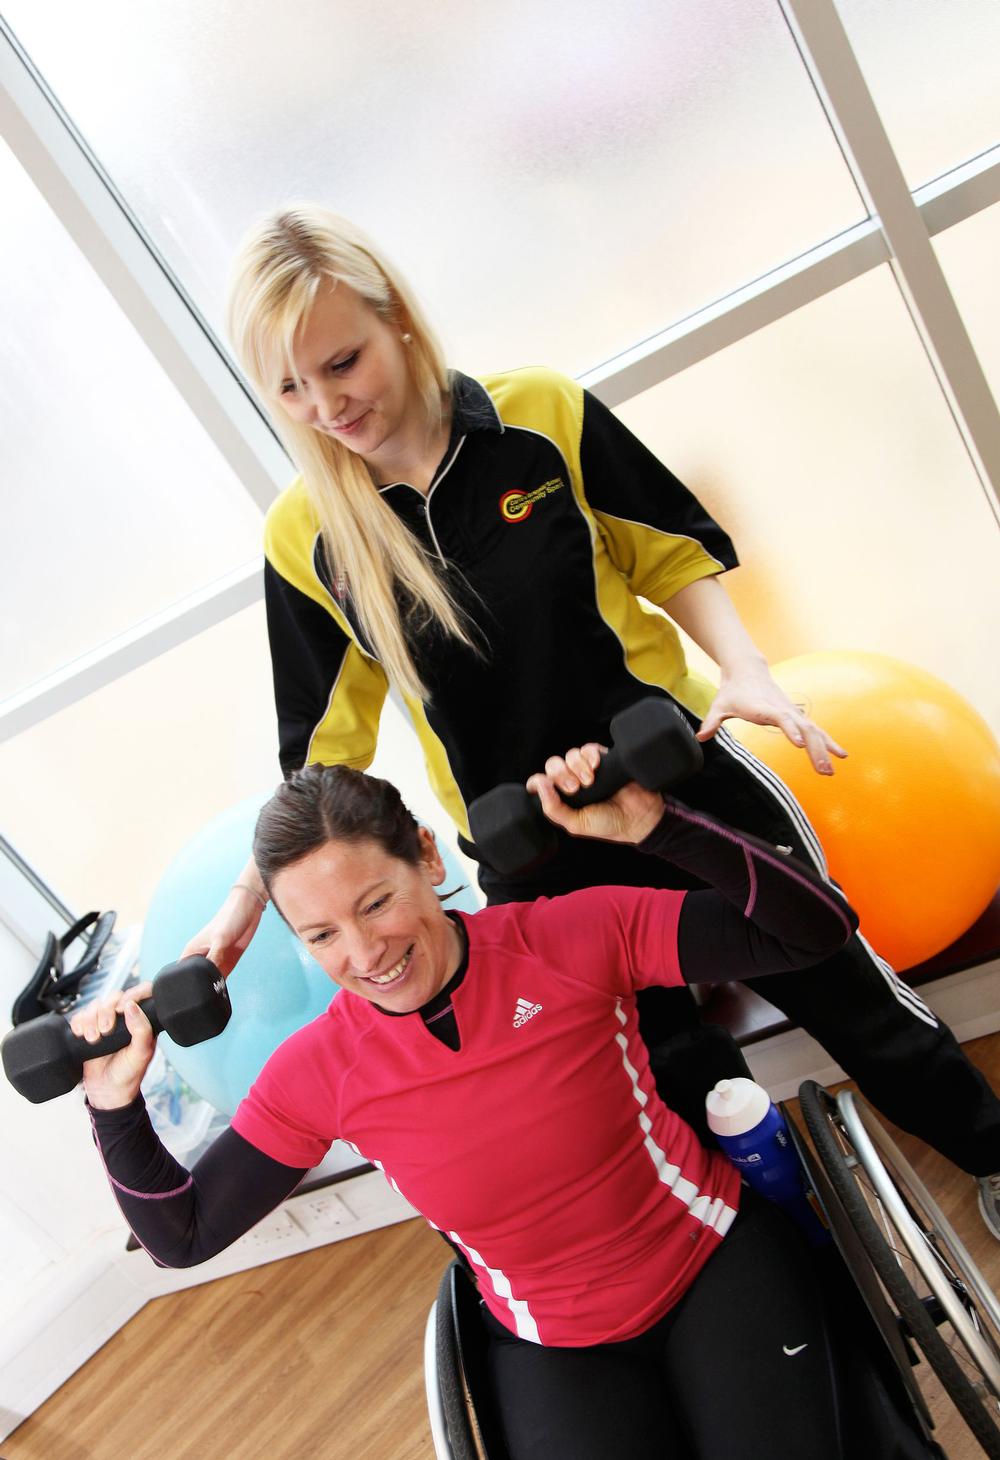 Schemes such as the Inclusive Fitness Initiative have helped bring down barriers for accessibility